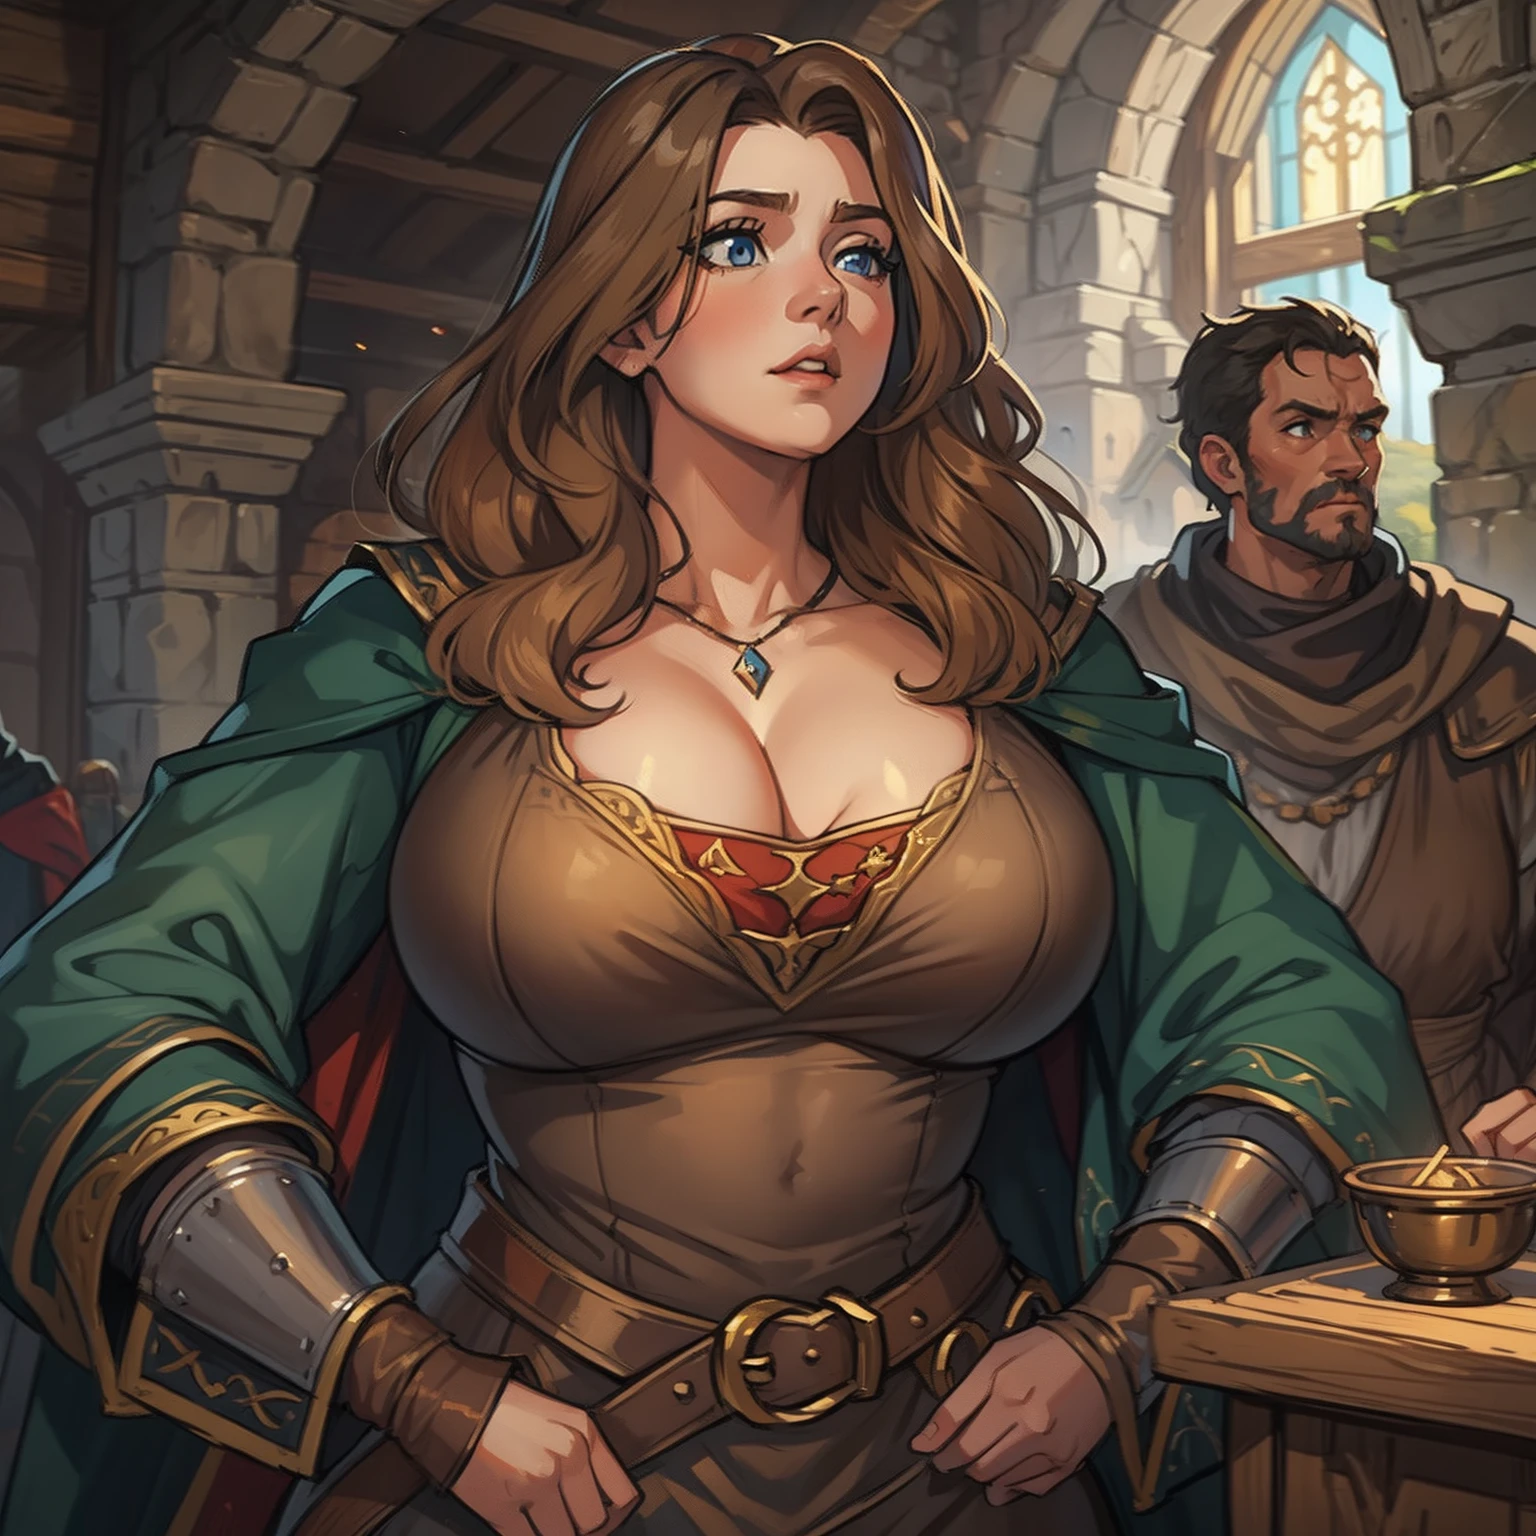 a portrait of a curvy woman neckline large  random an NPC for a medieval RPG wearing medieval costumes in a medieval art RPG art a rough detail art